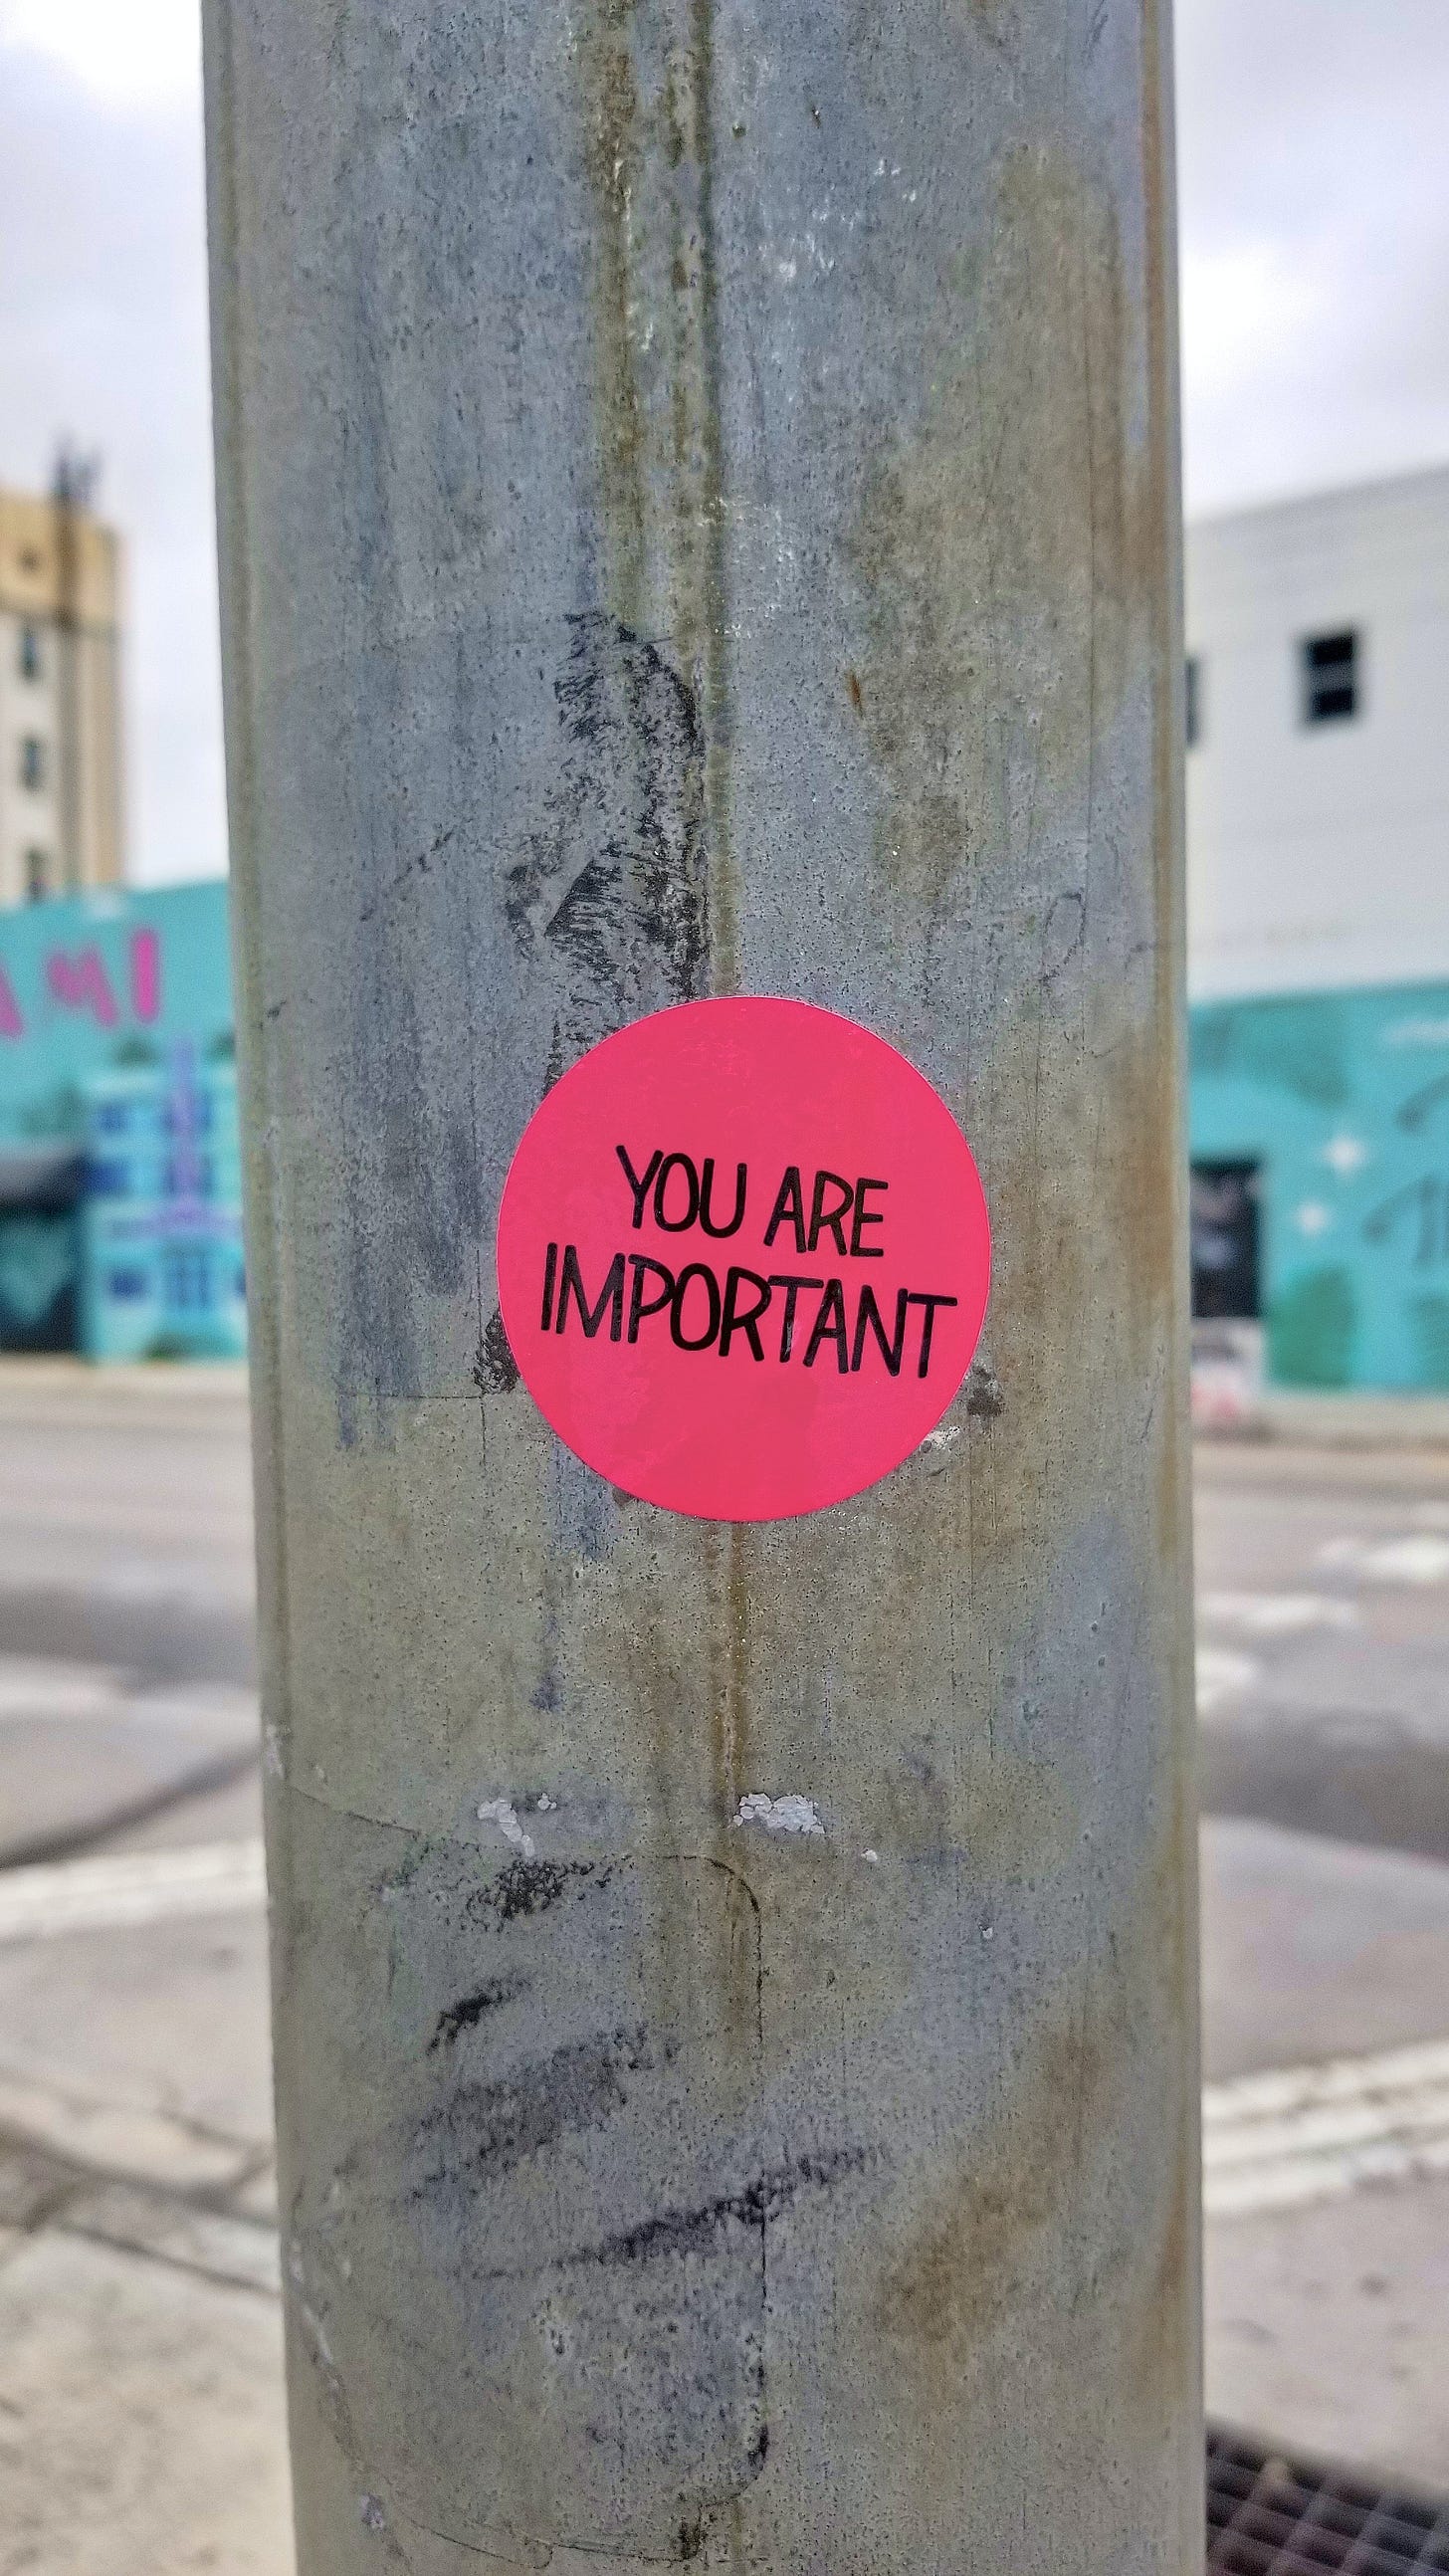 Pink sign on telephone pole reading "You are important".